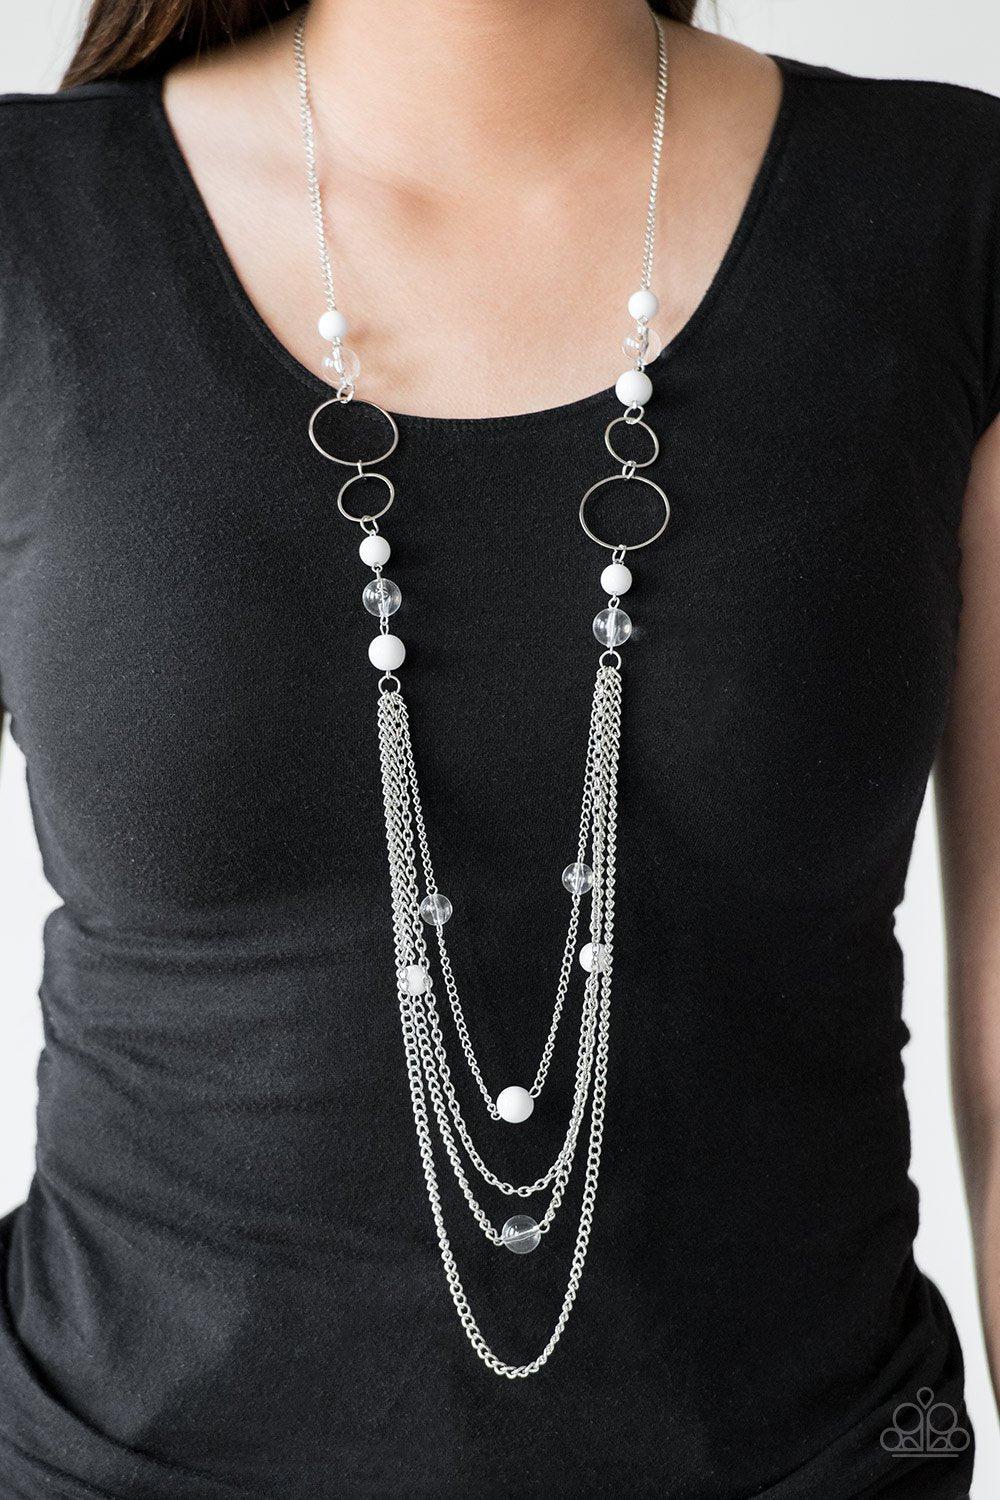 Bubbly Bright White and Silver Necklace - Paparazzi Accessories - lightbox -CarasShop.com - $5 Jewelry by Cara Jewels